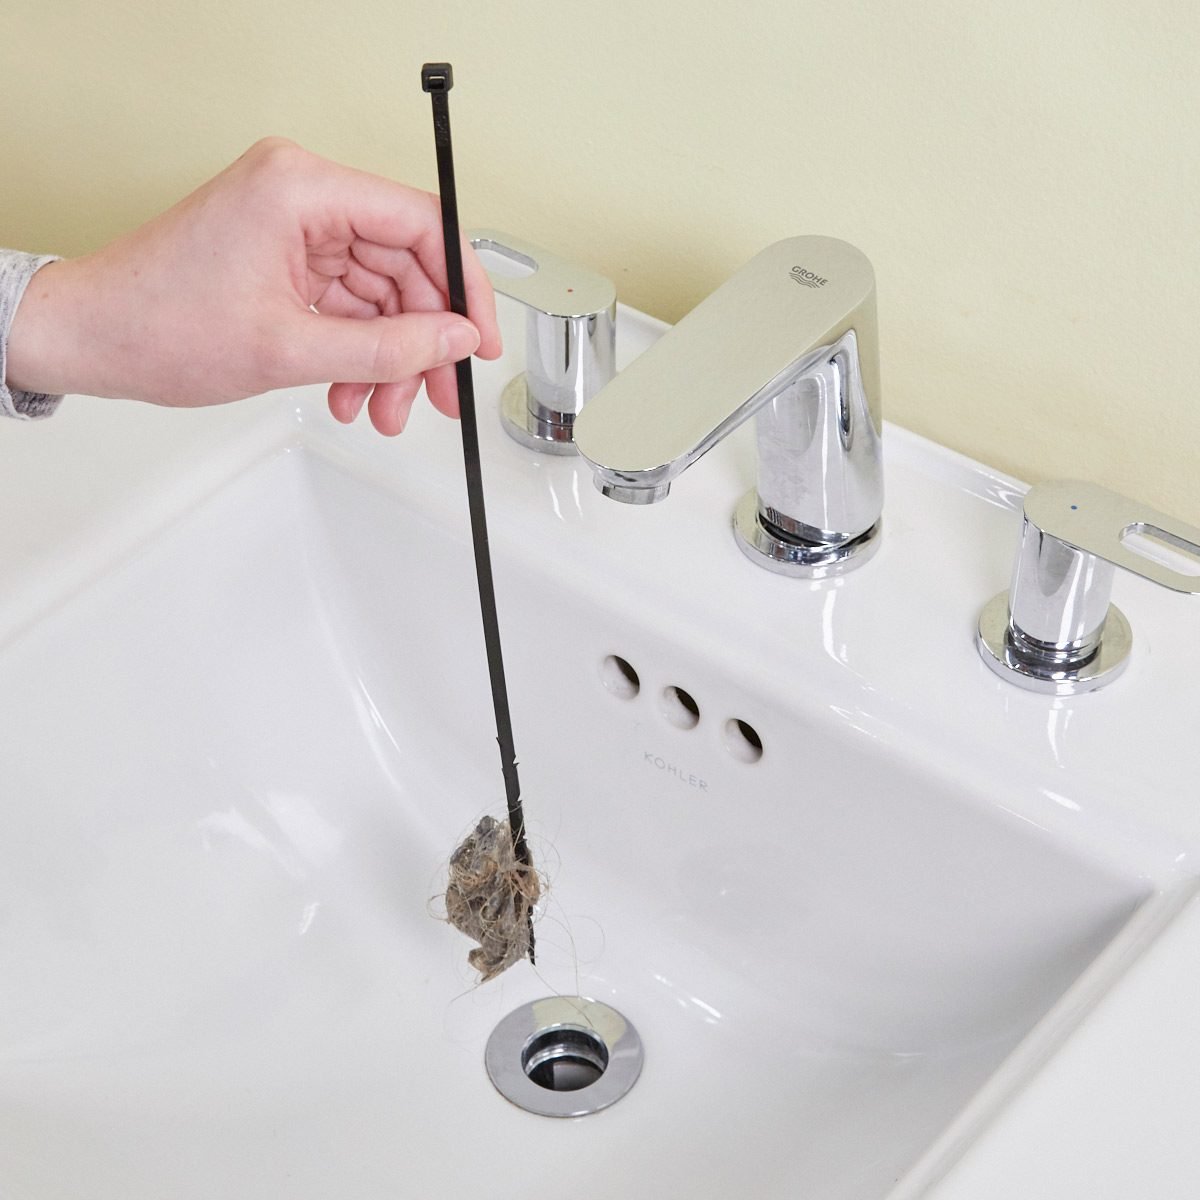 How to Clean and Unclog a Bathroom Sink Drain